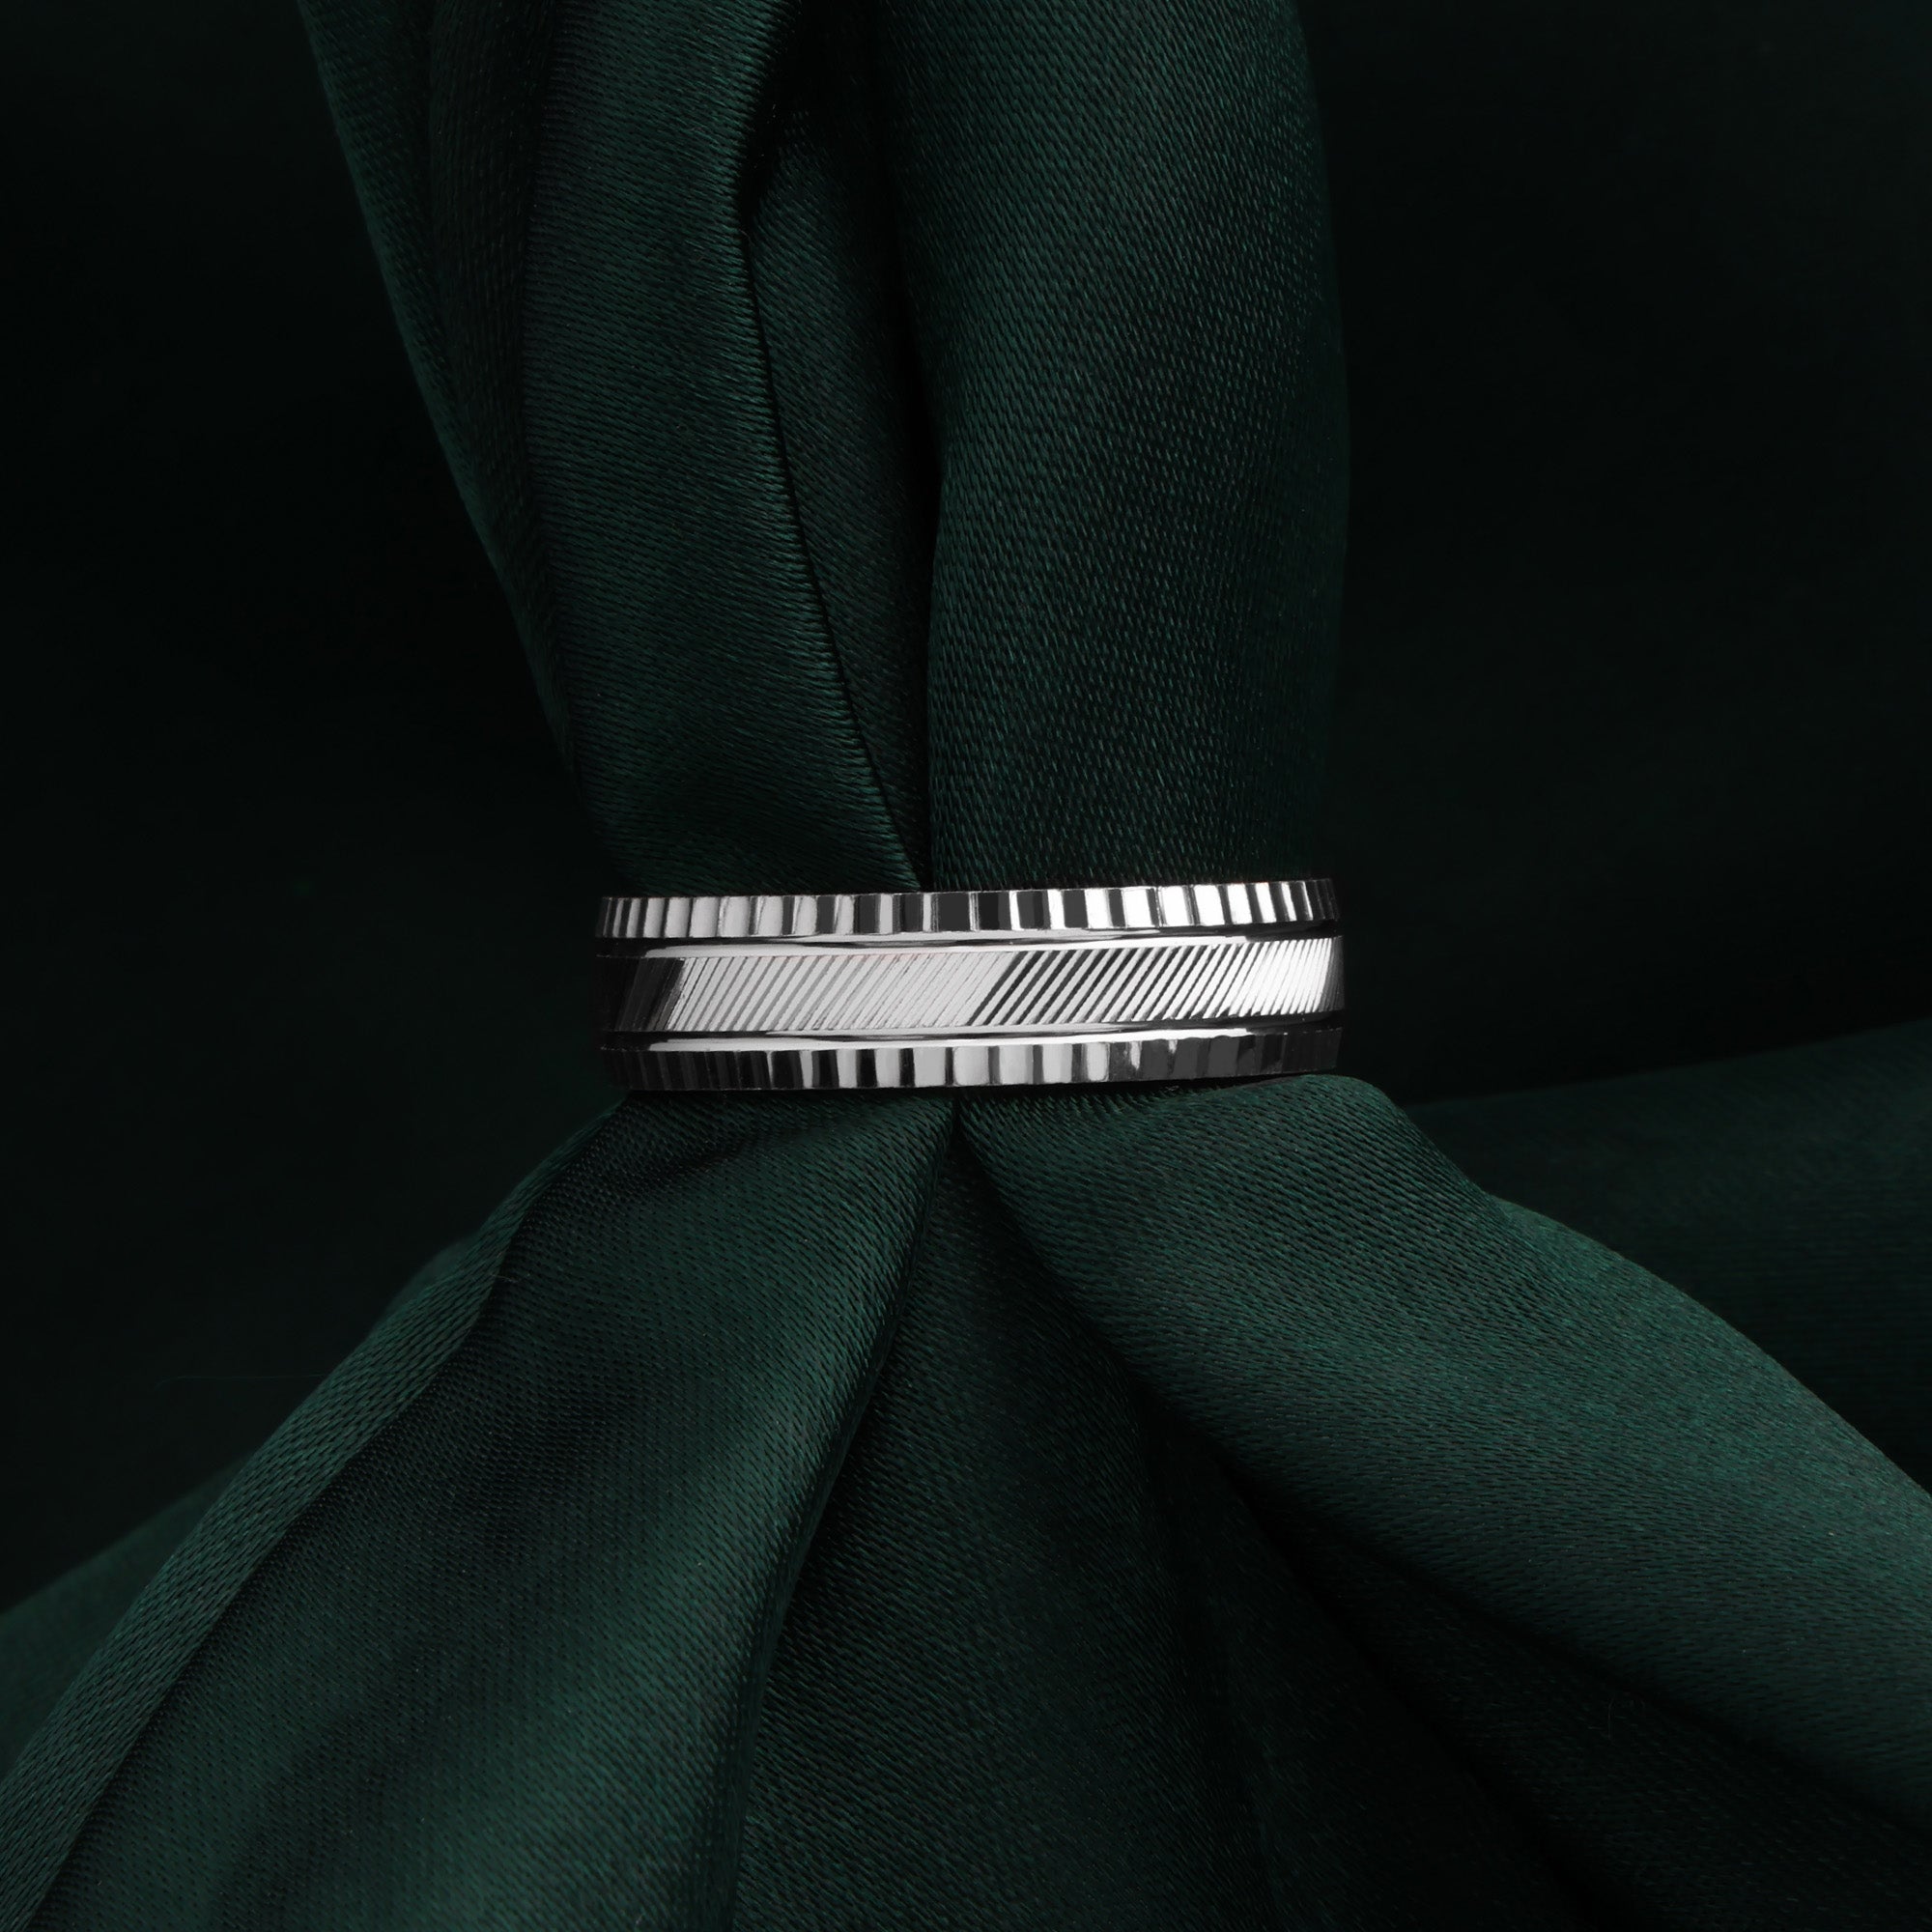 STERLING SILVER CLASSIC RING | SKU:0018885675, 0018885347, 0018885354